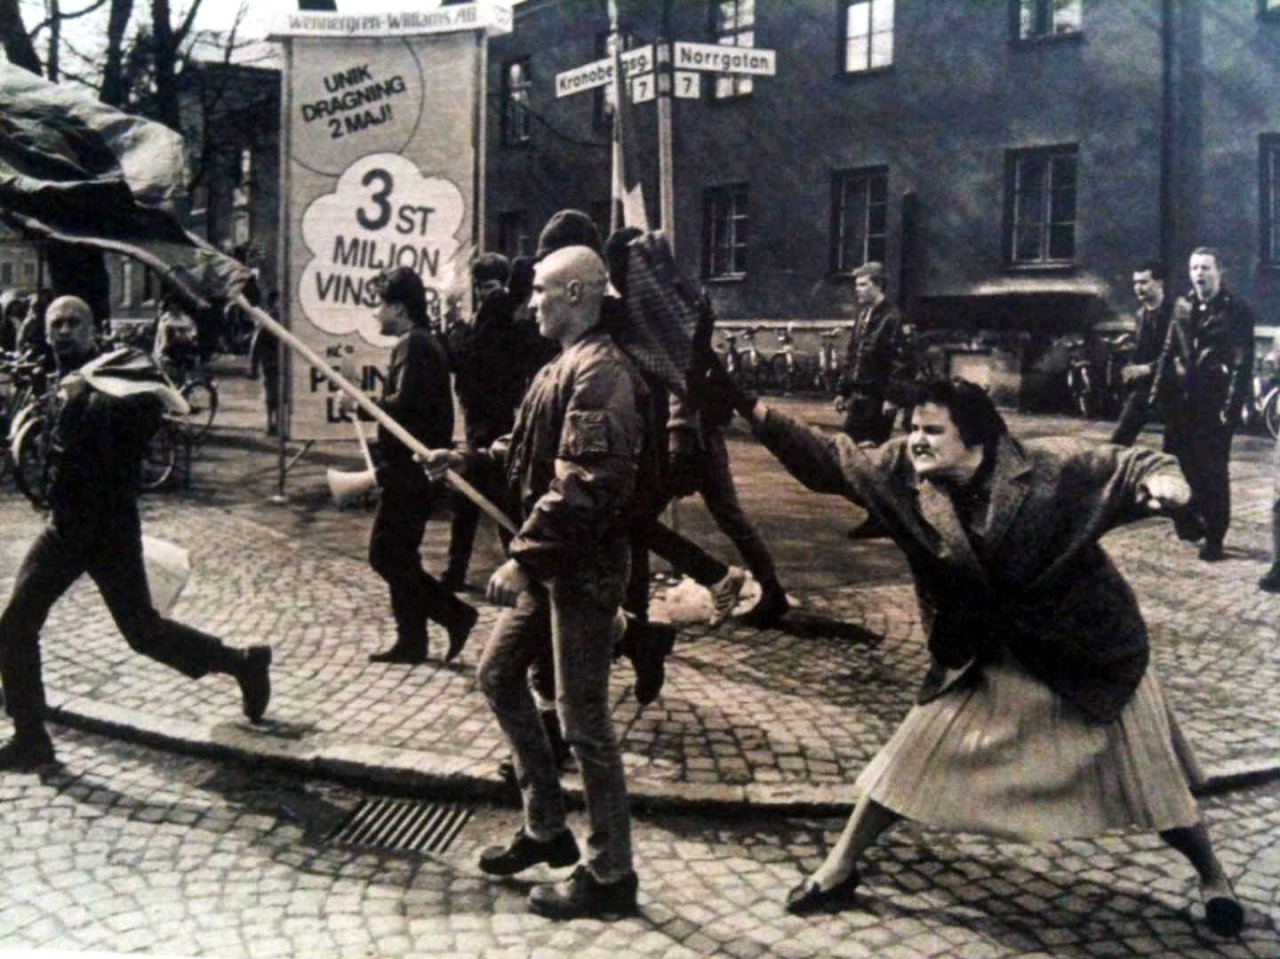 A Swedish woman hitting a neo-Nazi protester with her handbag. The woman was reportedly